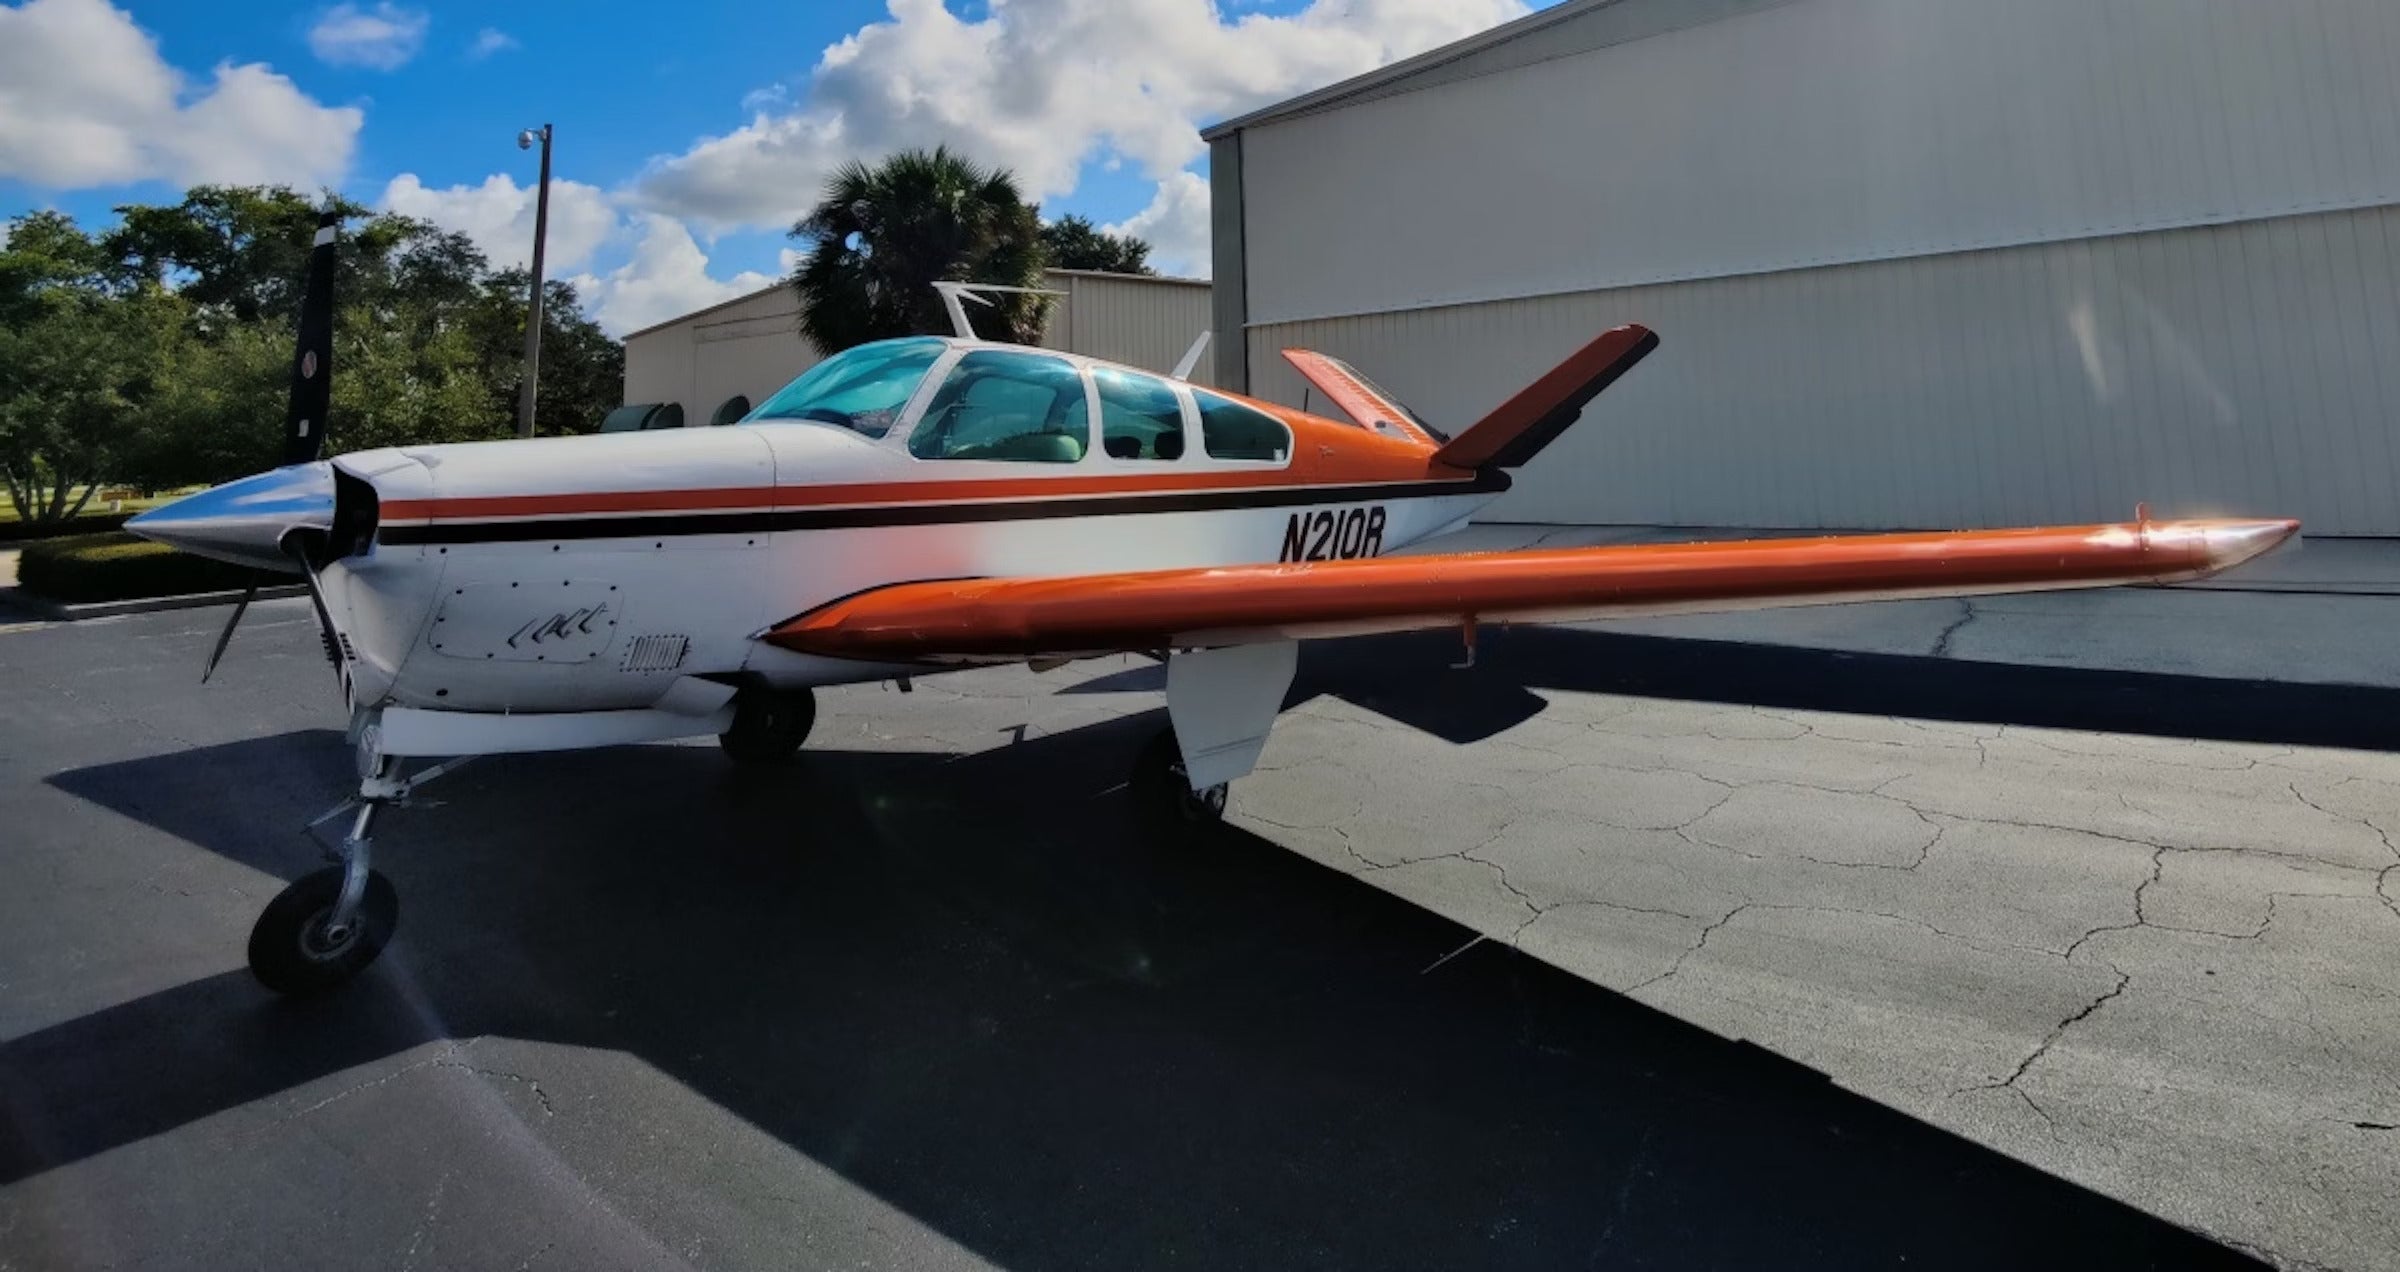 Today’s Top Aircraft For Sale Pick: 1967 Beechcraft V35 Bonanza